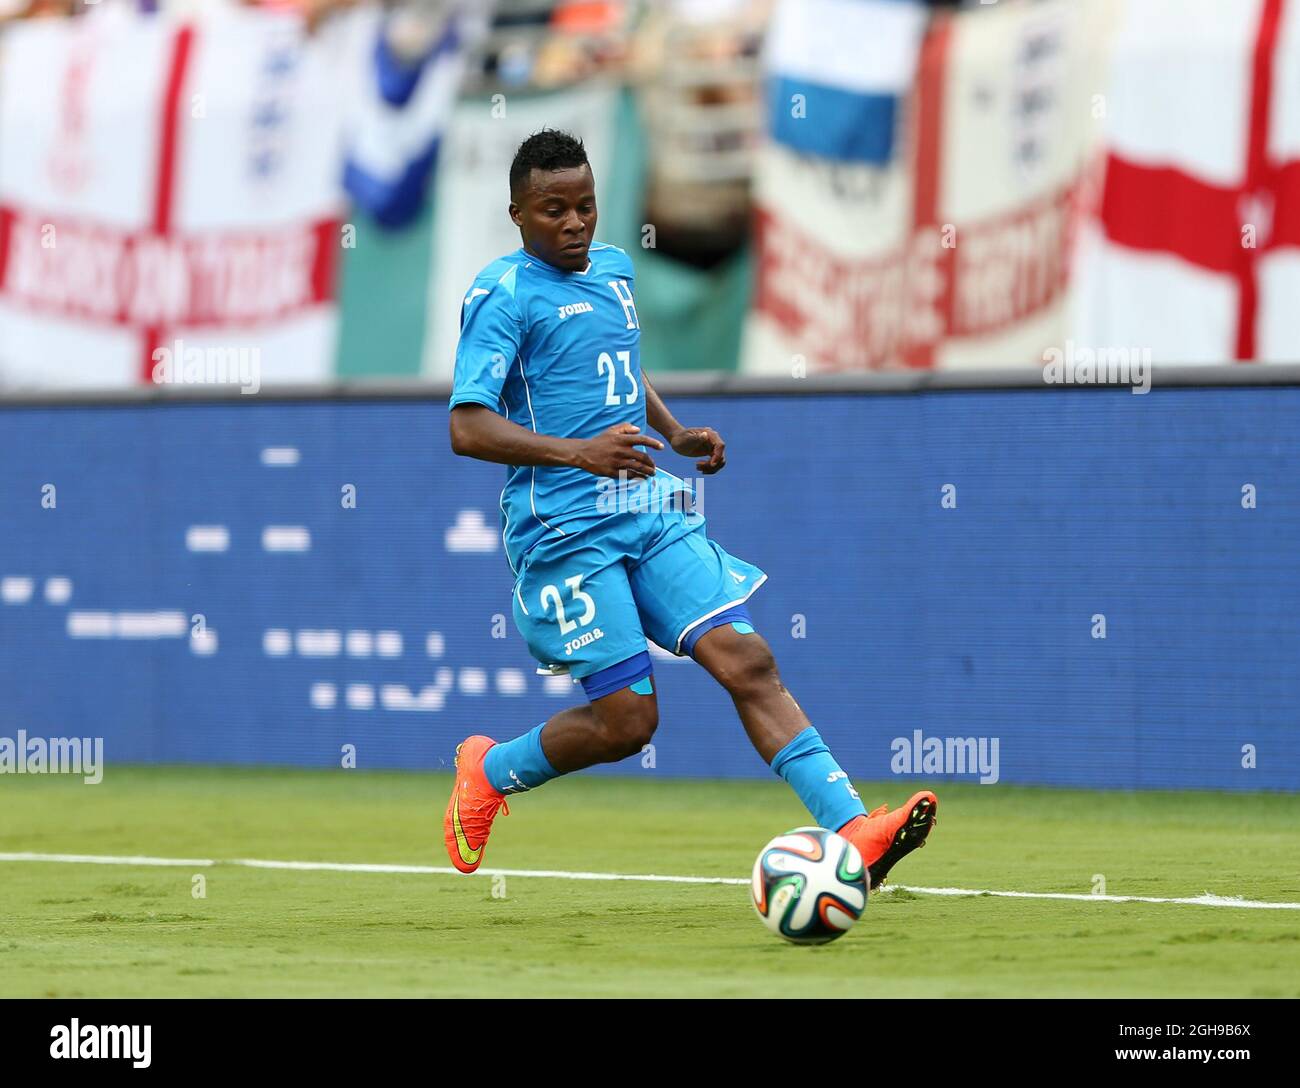 Honduras' Marvin Chavez in action during the international friendly soccer match between England and Honduras at Sun Life Stadium in Miami, Florida on June 7, 2014. Pic David Klein. Stock Photo